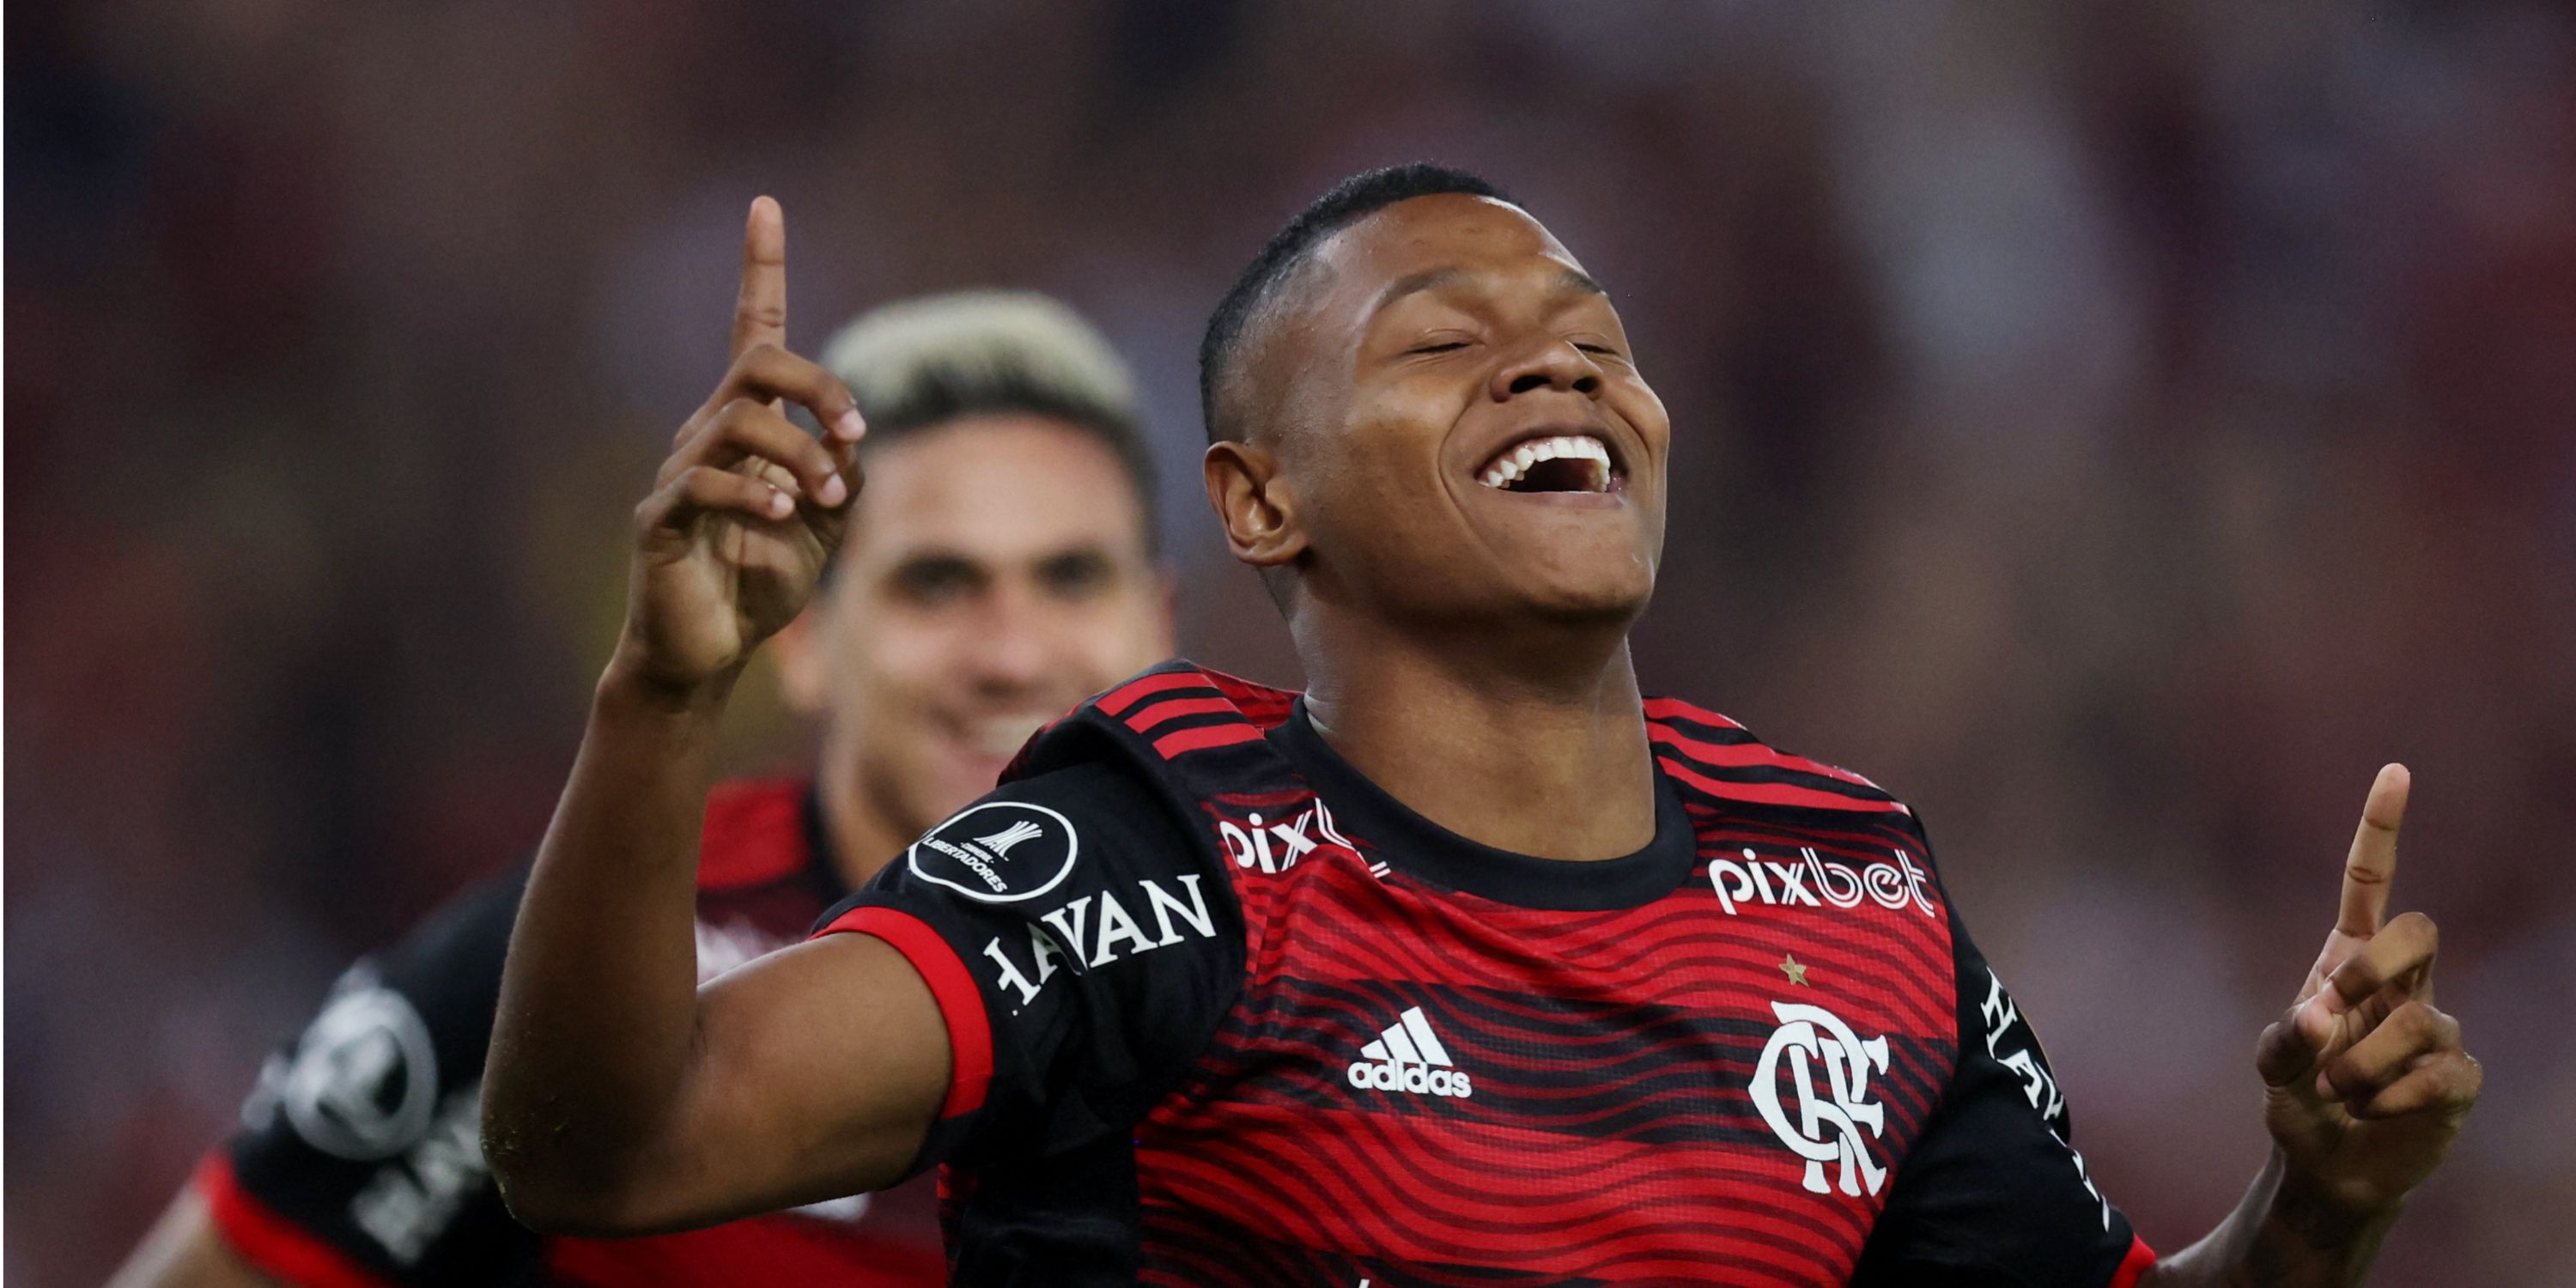 Matheus-Franca-in-action-for-Flamengo